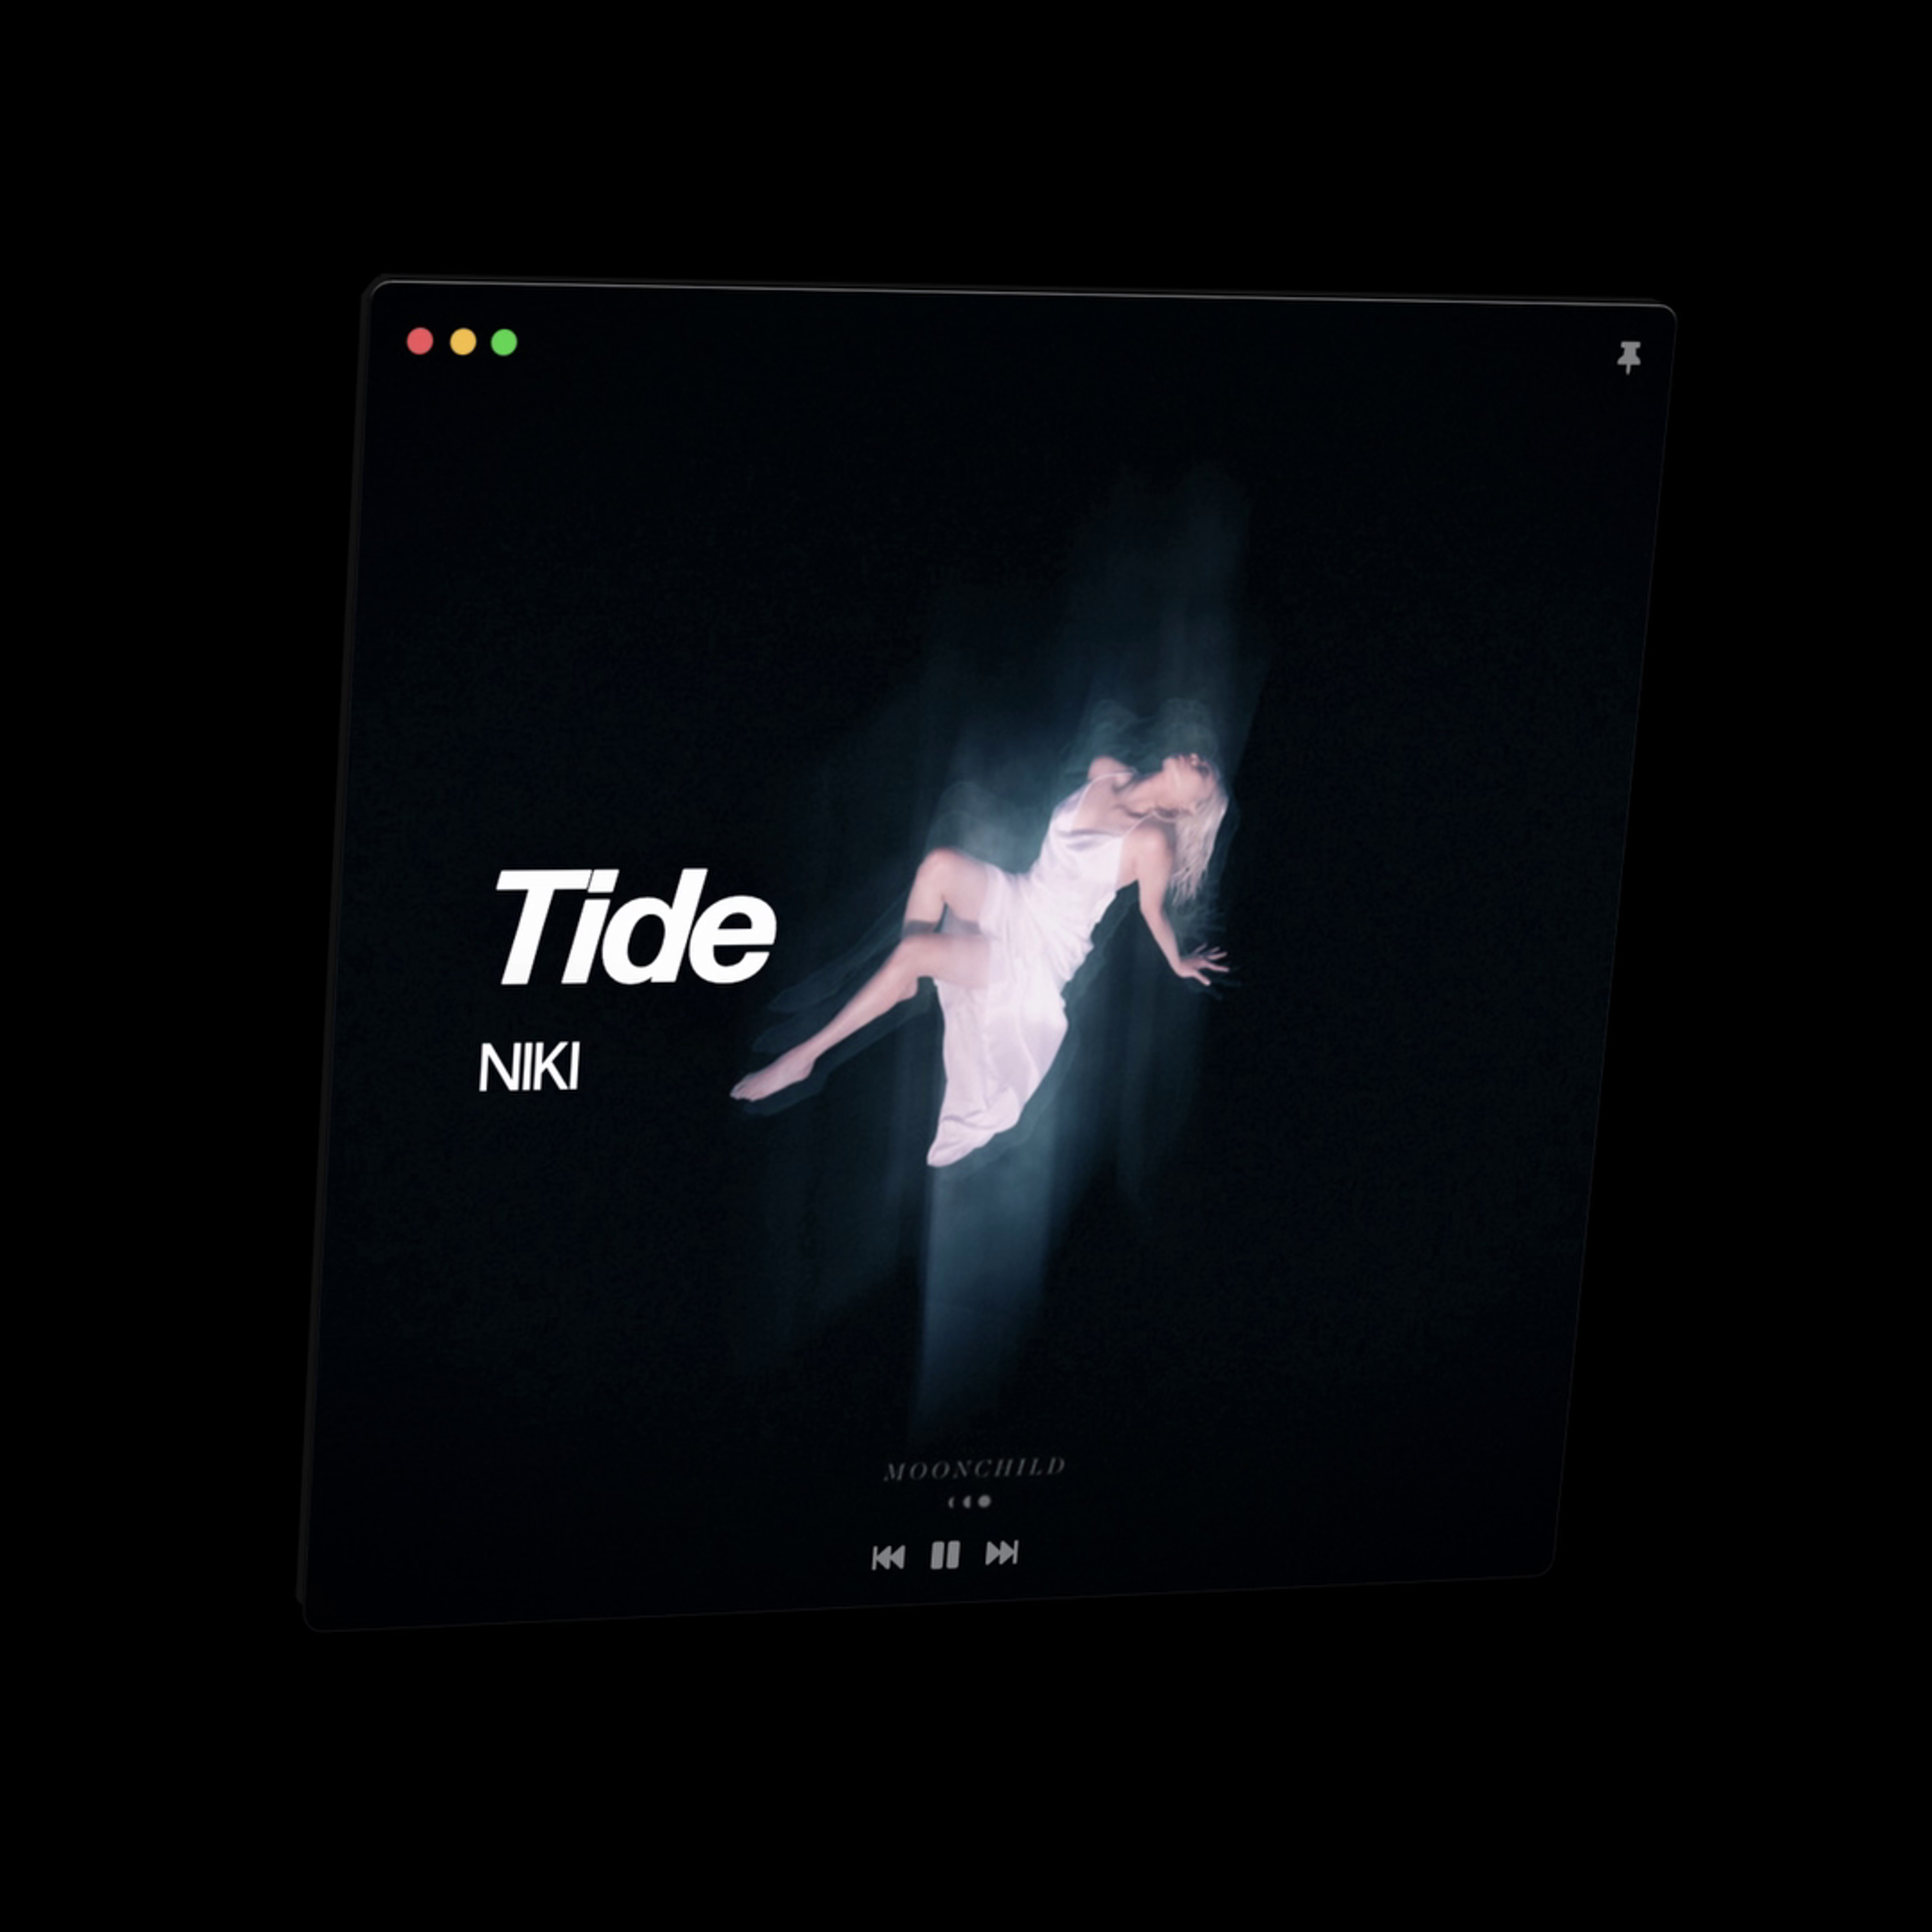 A 3D render of the Gemini app window. The album art of NIKI's "Moonchild" album is shown filling the whole window's background. The album art depicts an ethereal scene with NIKI floating in a dark space. NIKI is dressed in a flowing white garment that gives the impression of lightness and movement, as if she is suspended in air or underwater. The surrounding darkness contrasts sharply with the brightness of the person's attire and skin, drawing focus to NIKI. The text "MOONCHILD" is written at the bottom of the album art. There is a backward, forward, and play/pause button at the bottom of the window. In the center left, there is bold text that reads "Tide", and under that text is smaller text that reads "NIKI".